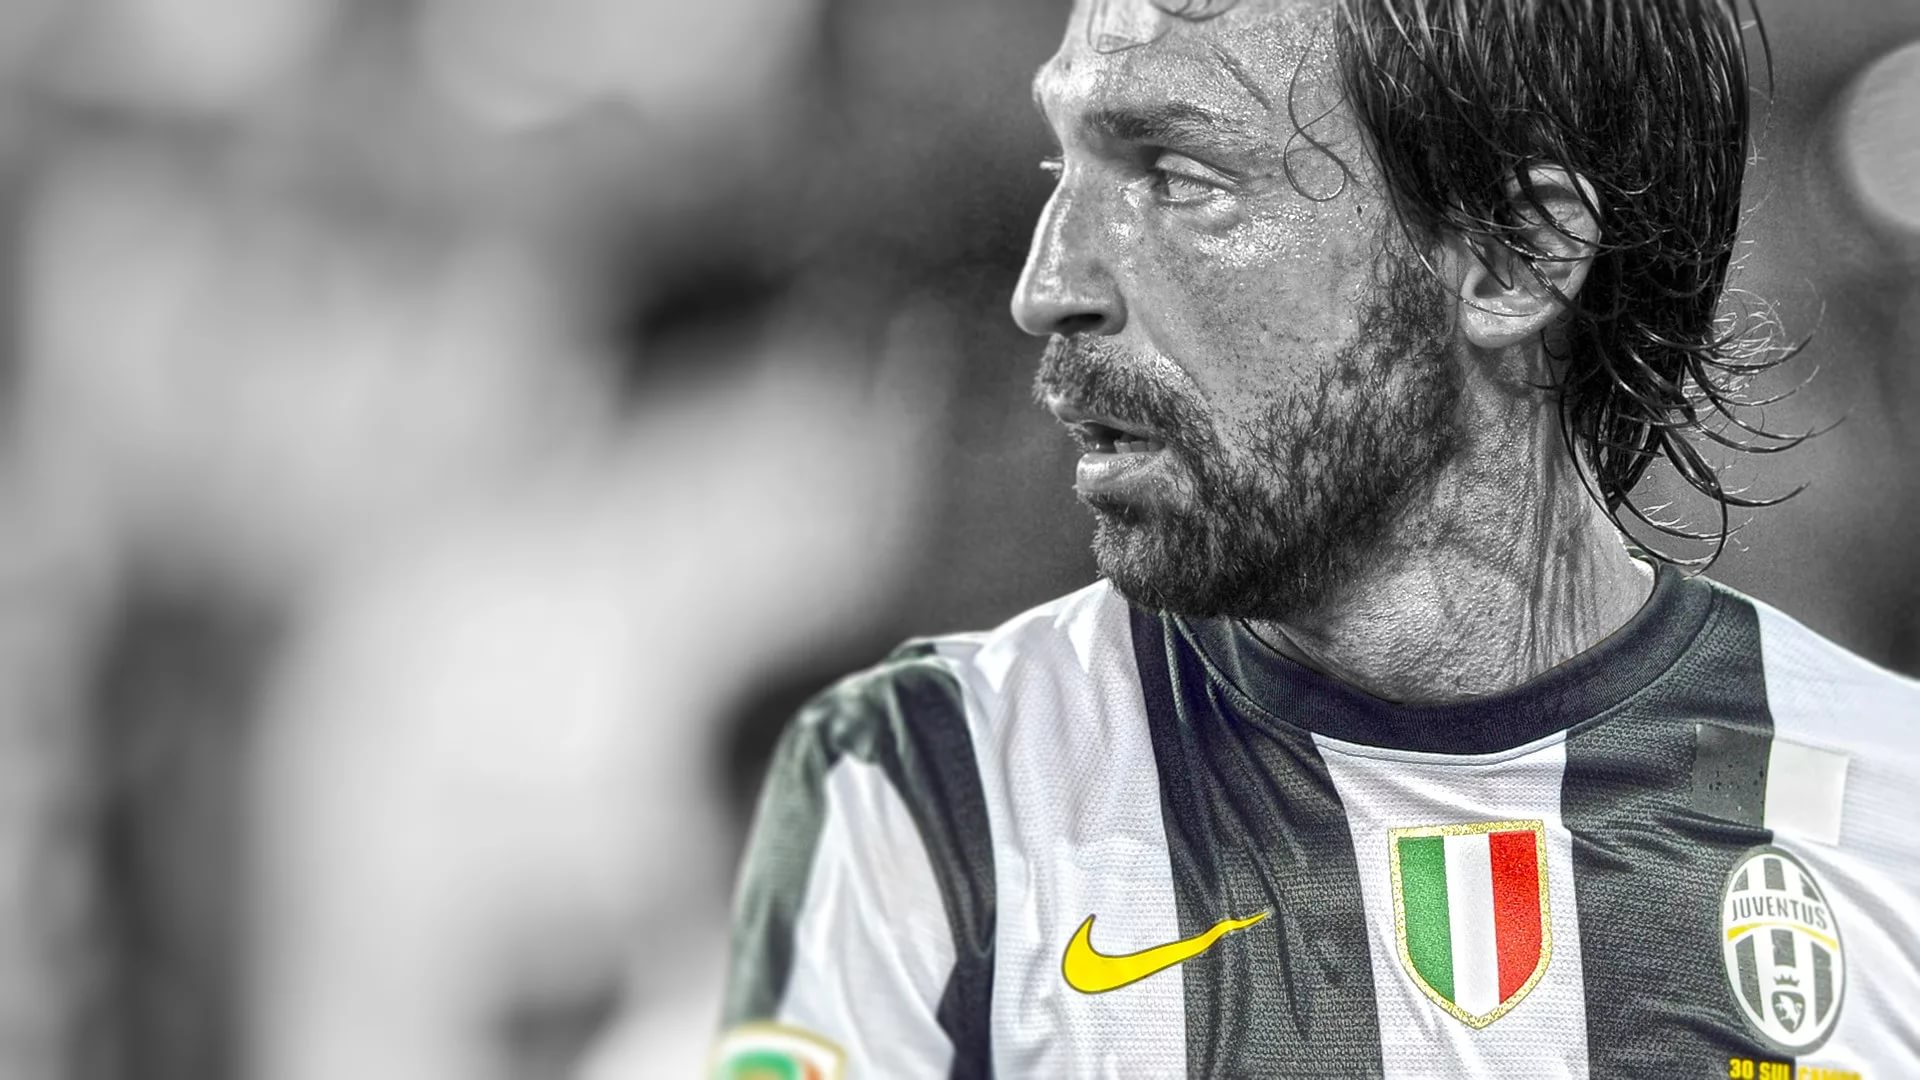 Download All Images - Andrea Pirlo , HD Wallpaper & Backgrounds